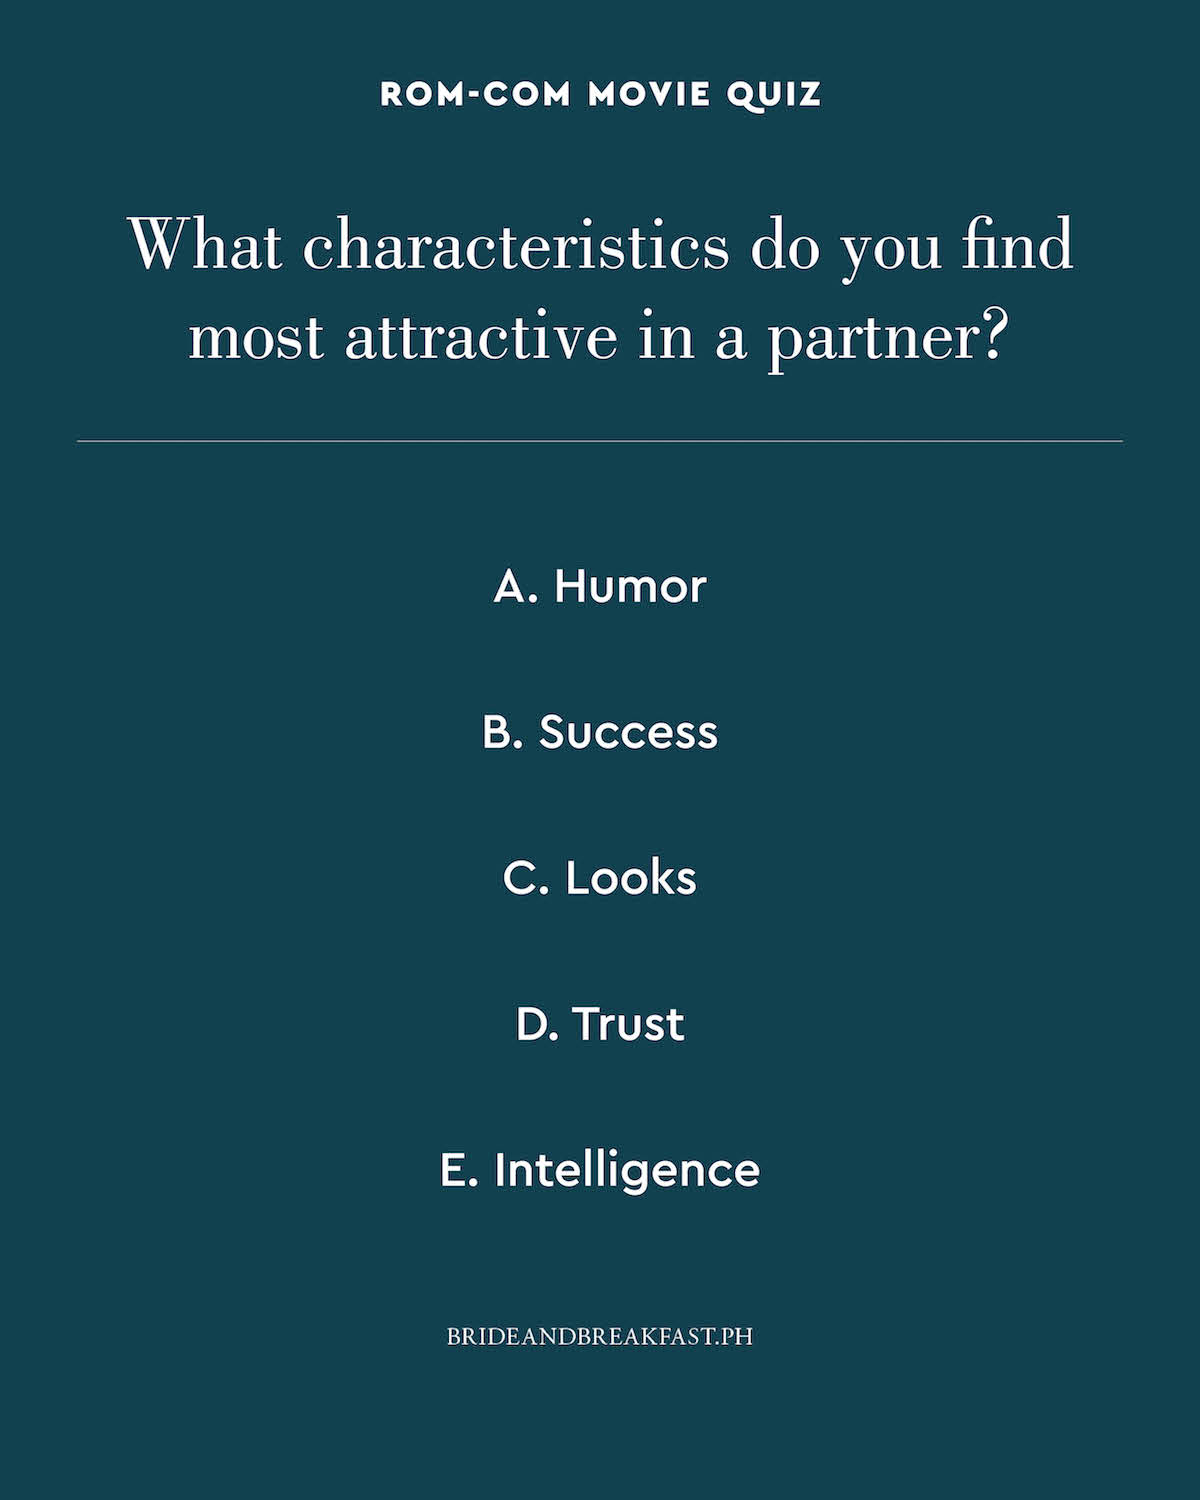 What characteristics do you find most attractive in a partner? A. Humor B. Success C. Looks D. Trust E. Intelligence